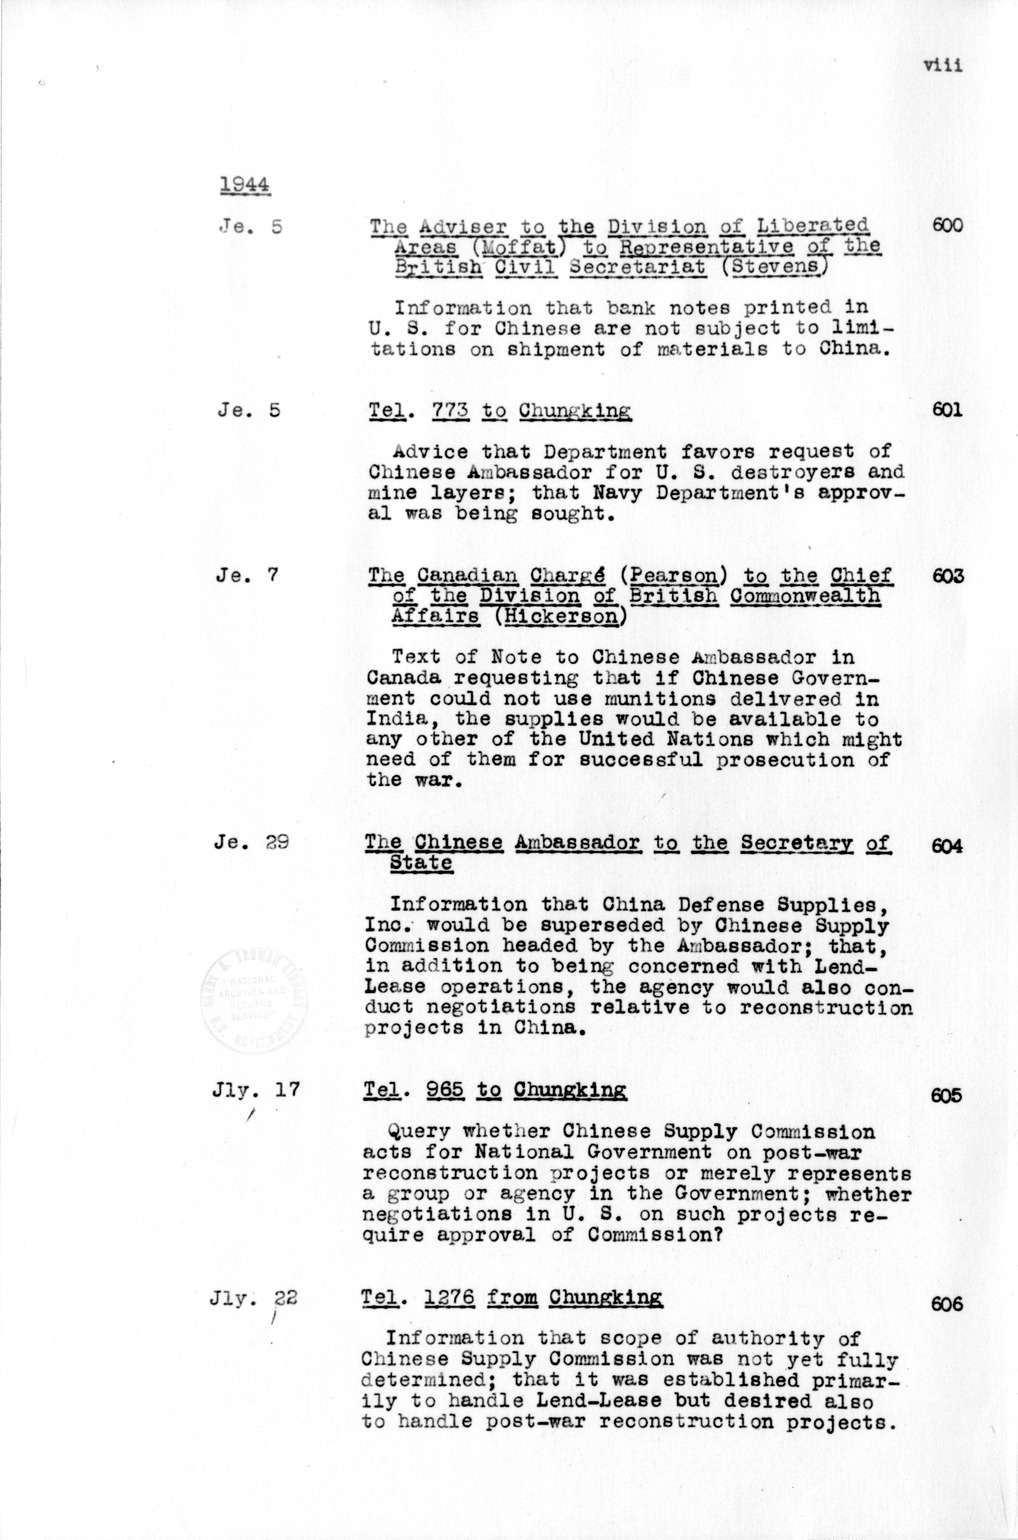 Title and Table of Contents, Documents On Diplomatic Aspects Of Efforts By The United States To Supply China With Materials Of War Under The Lend-Lease Act, 1940-1947 - Part IV (1944-1947)